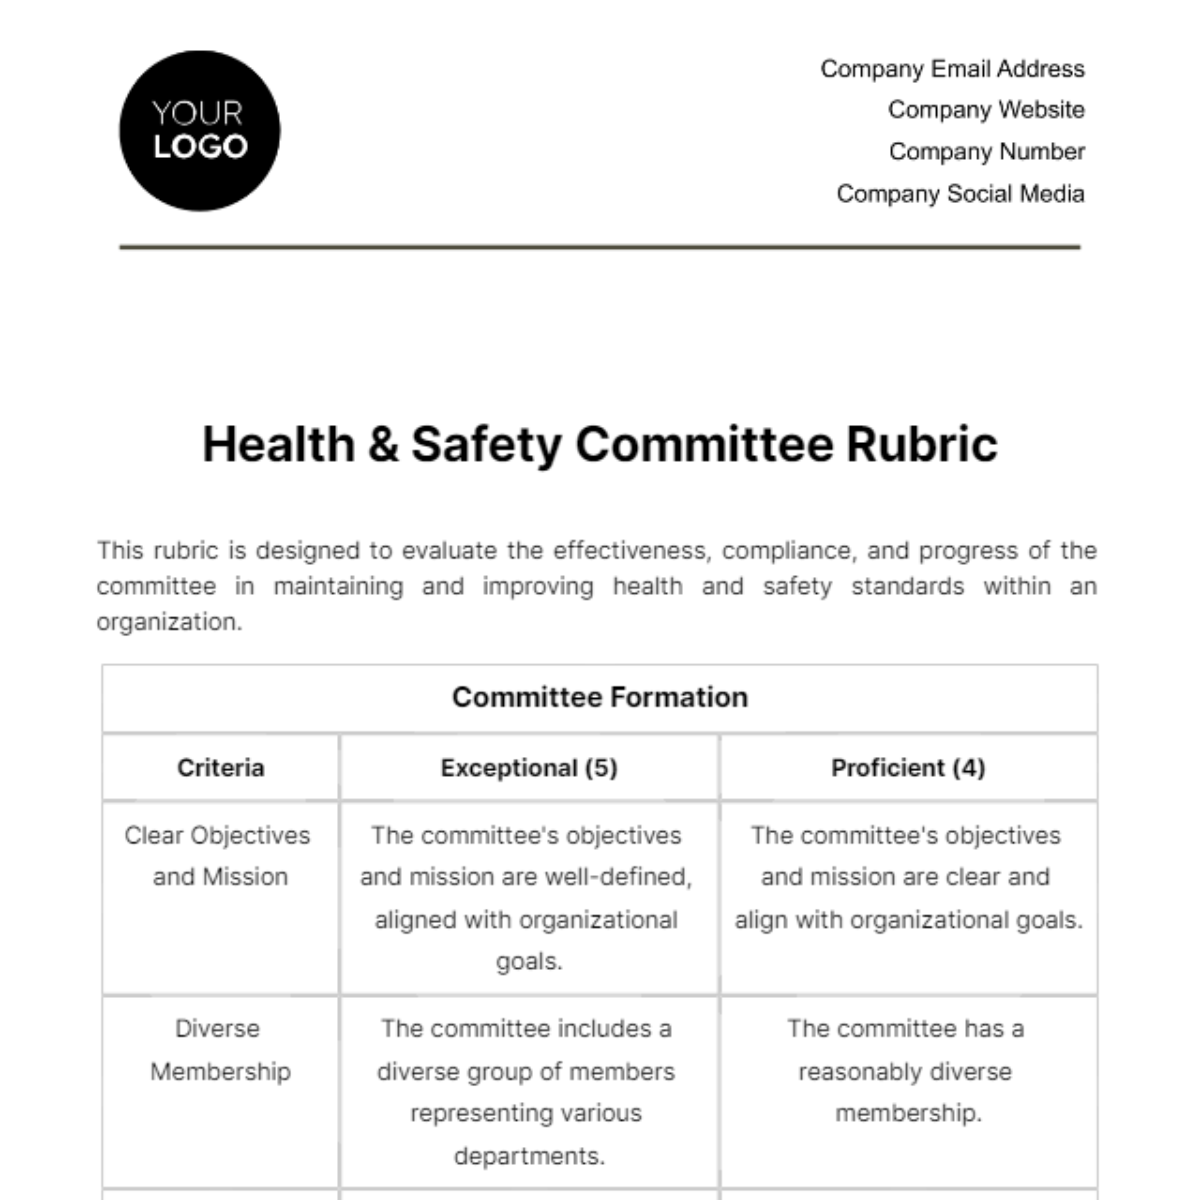 Health & Safety Committee Rubric Template